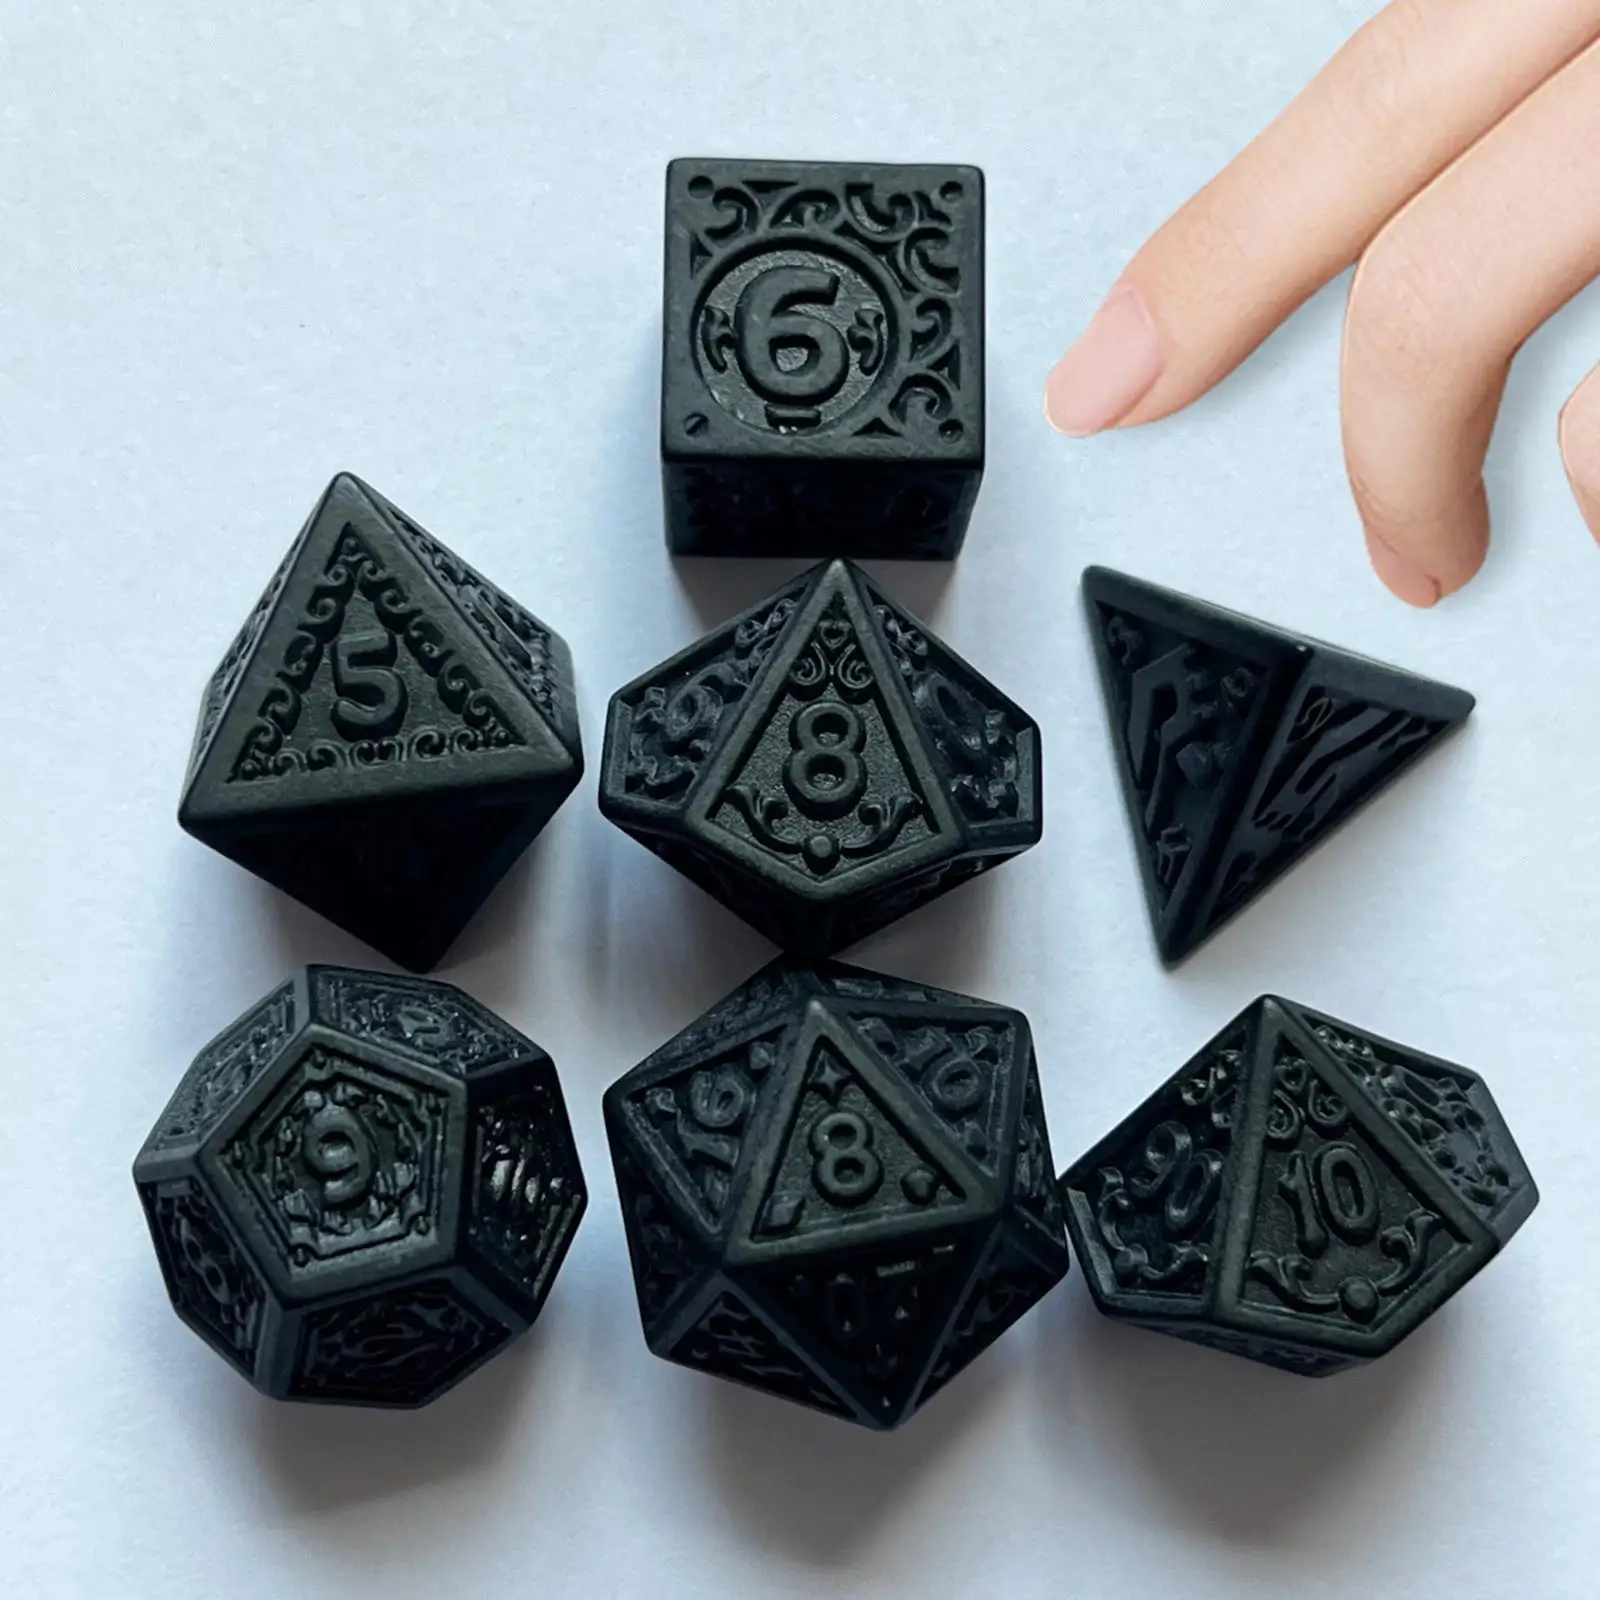 7Pcs Polyhedral Dice Gifts Board Games Party Favors Entertainment Toy Multisided Dice for Role Playing Game D4 D6 D8 D10 D12 D20